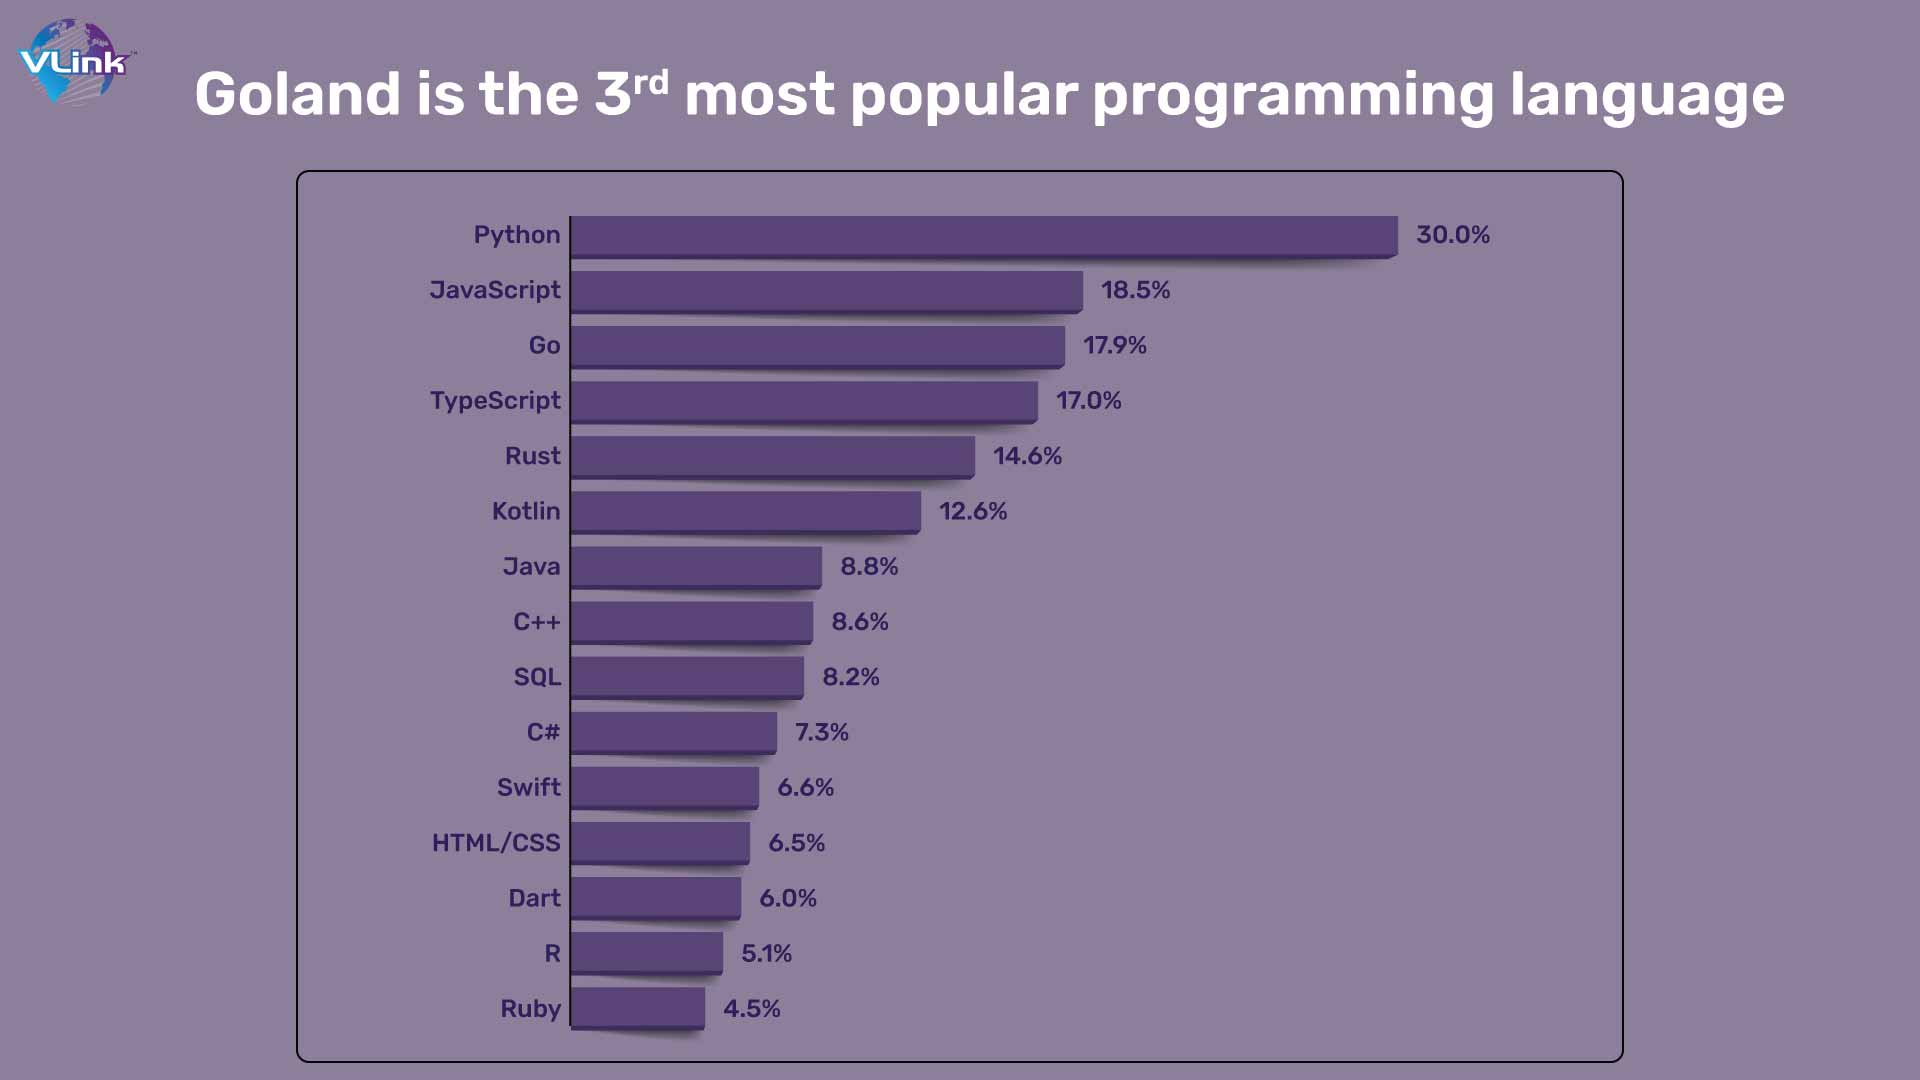 Goland is the 3rd most popular programming language